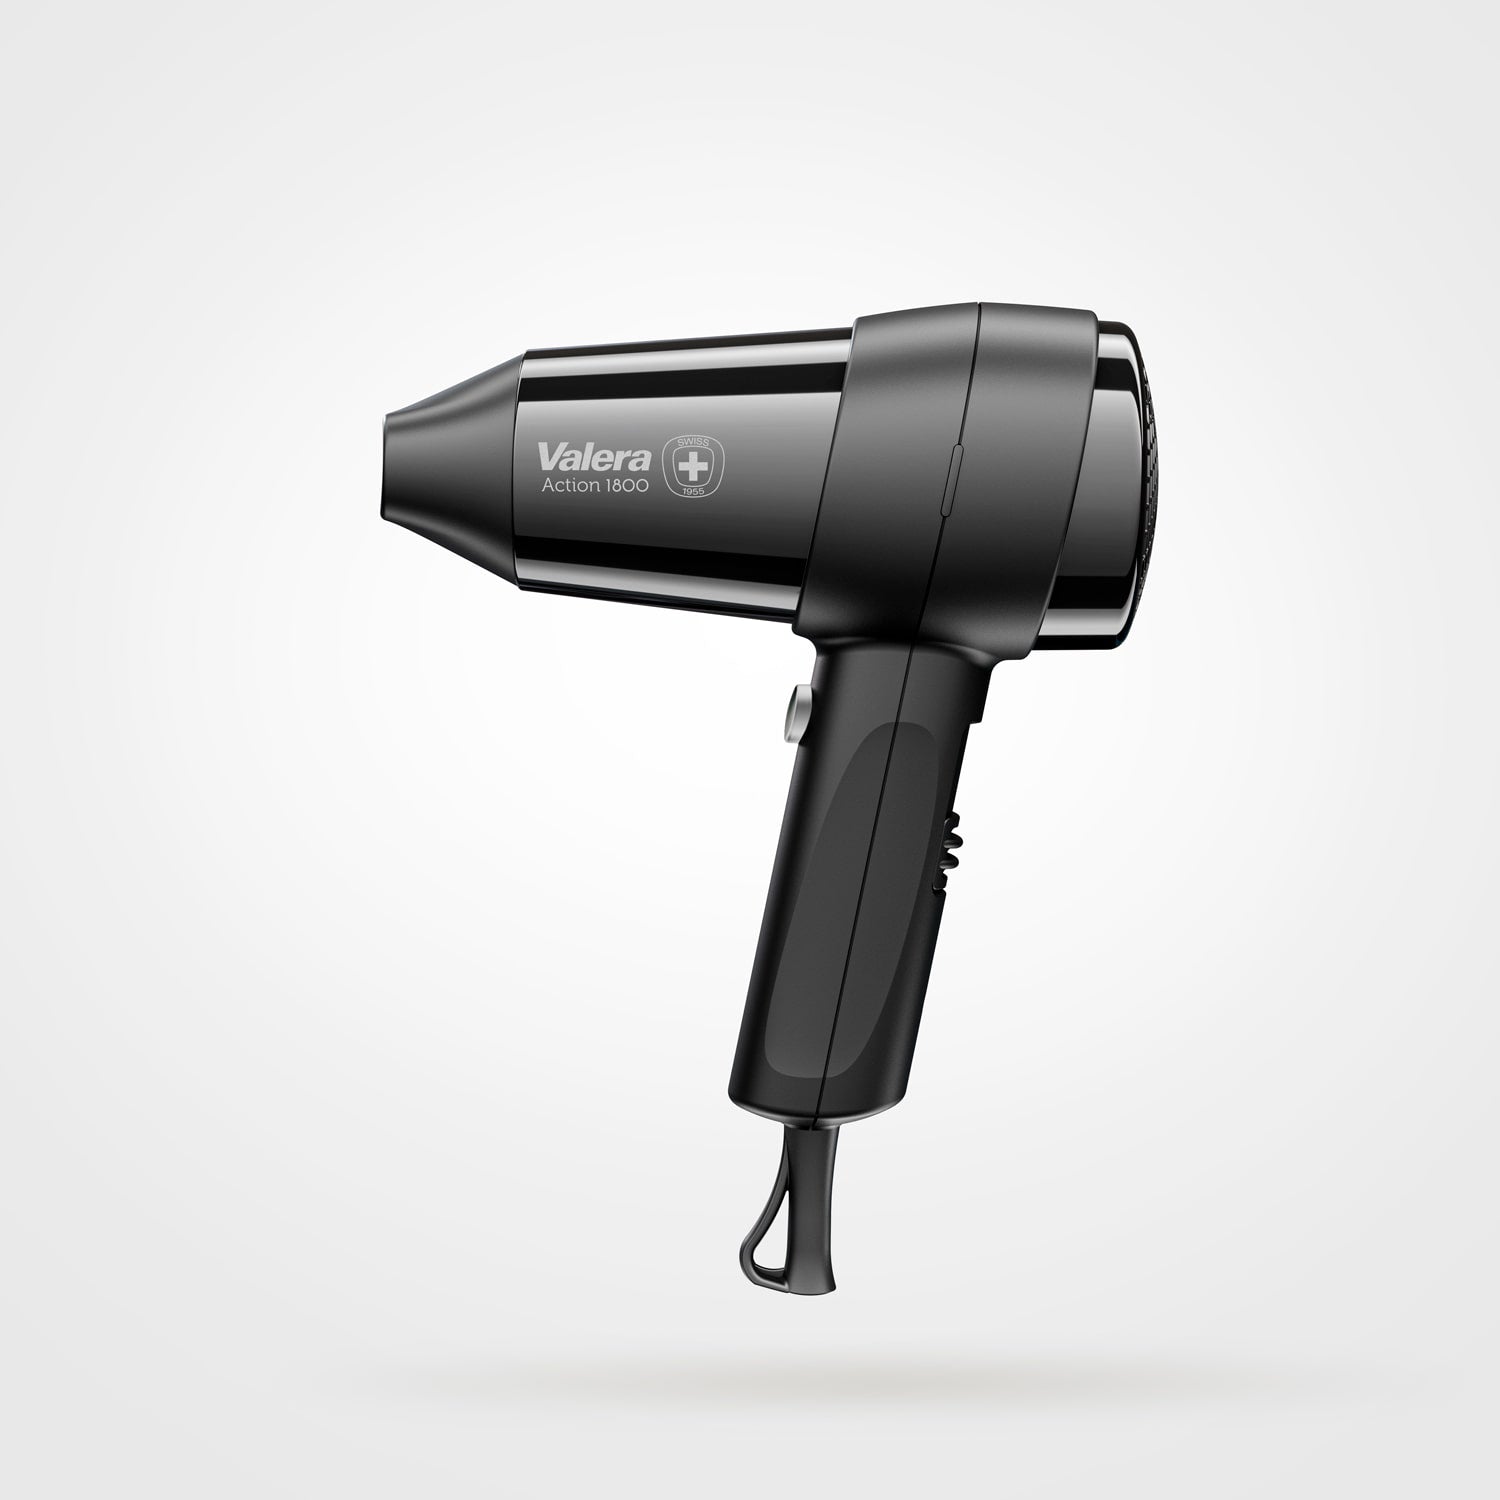 Action 1800 compact professional hairdryer